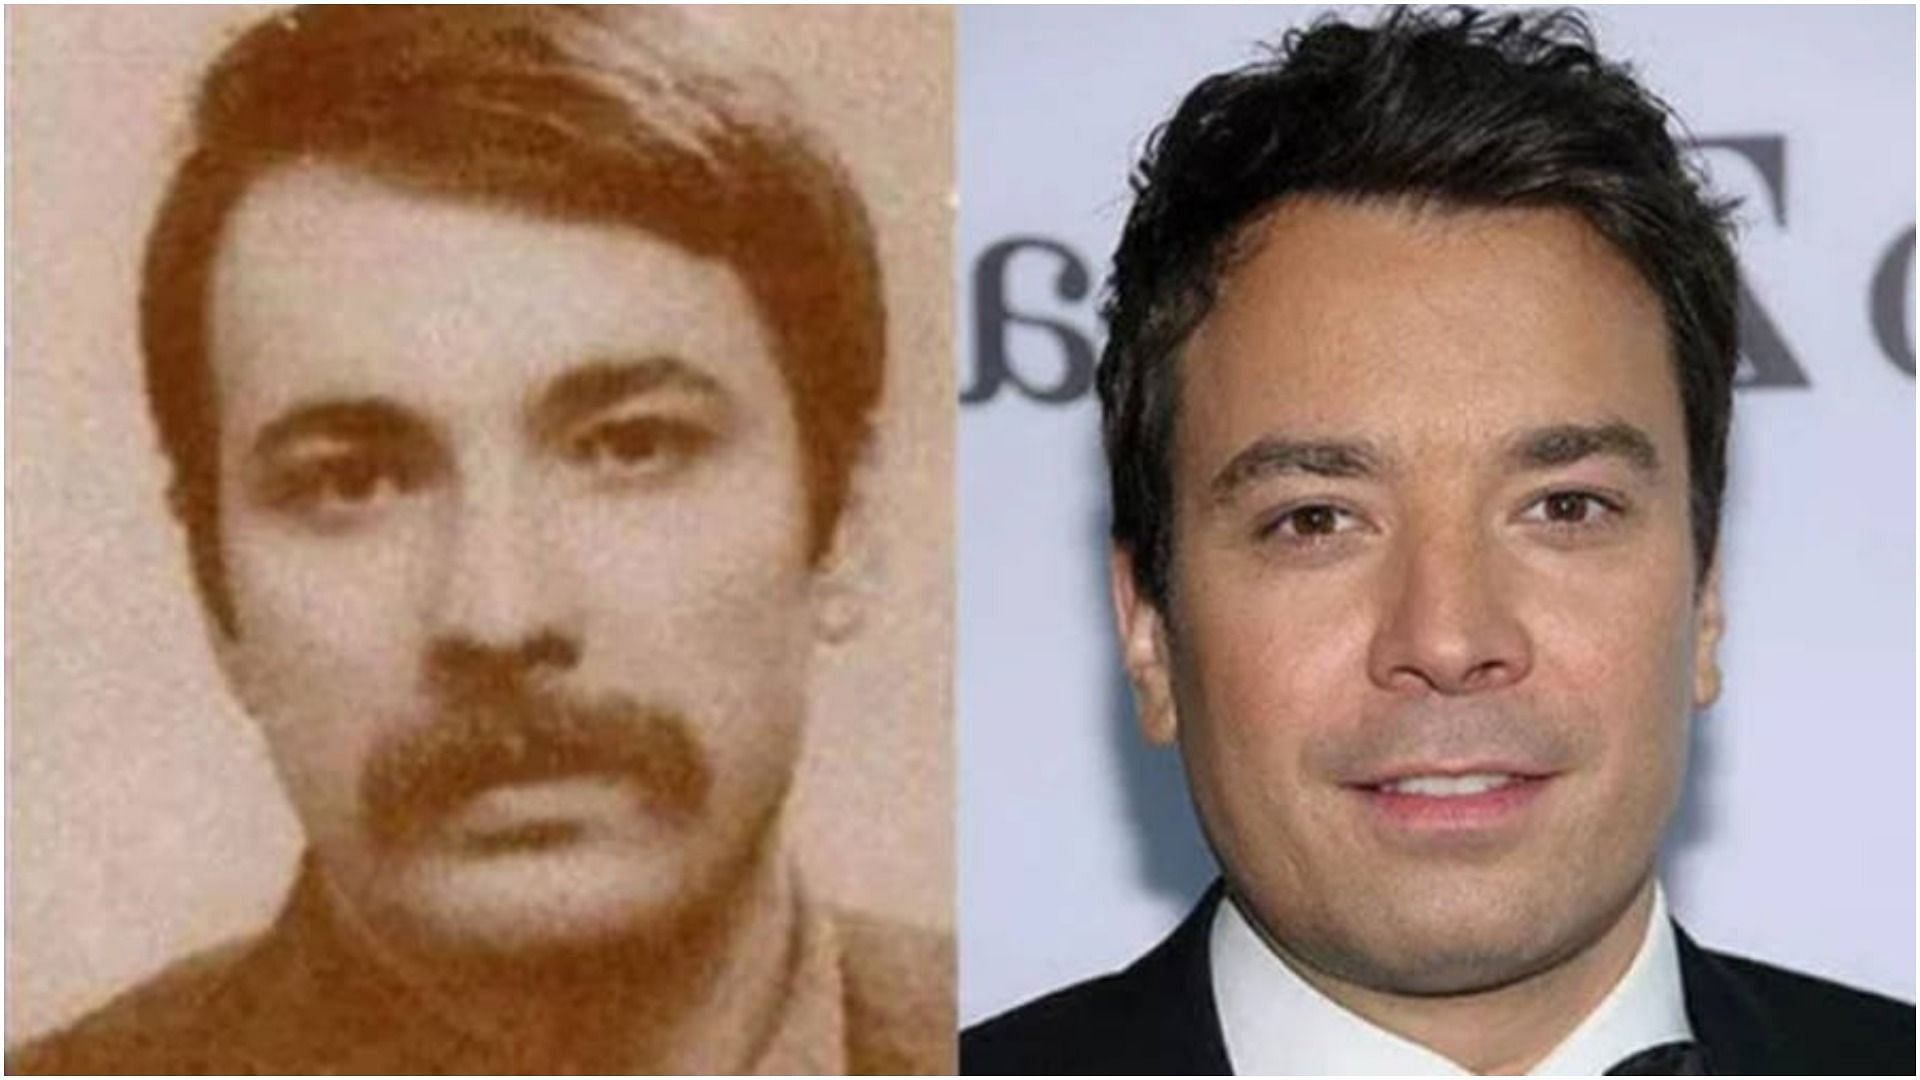 Jimmy Fallon and his lookalike (Images via Wikimedia Commons &amp; Flickr)